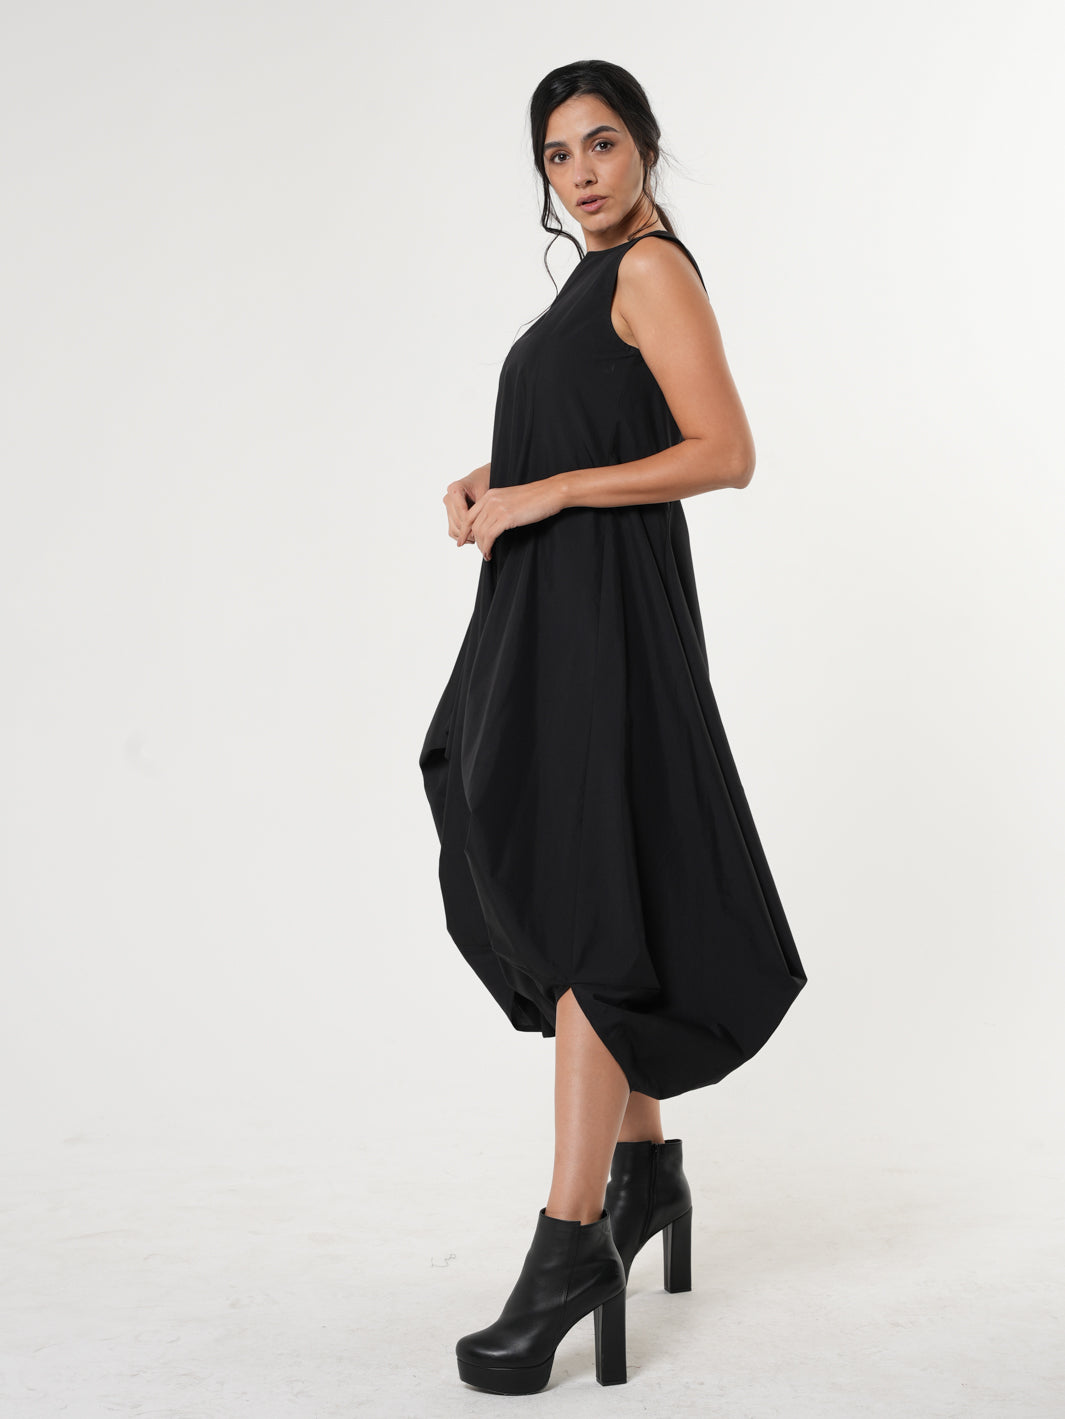 Sleeveless Black Dress With Drappings